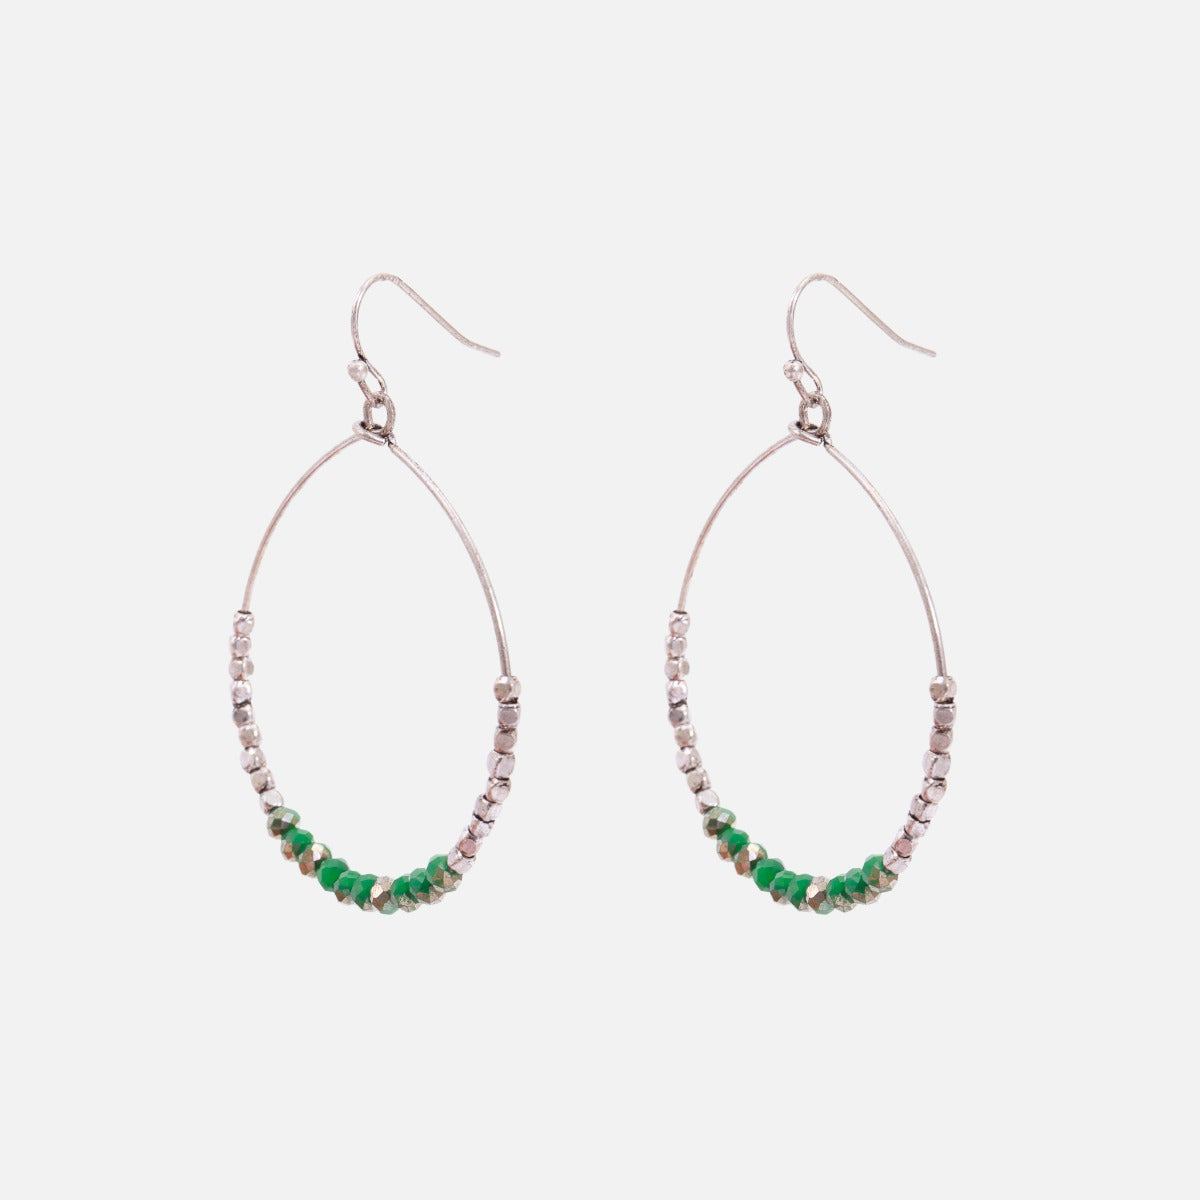 Earrings with silver and green beads